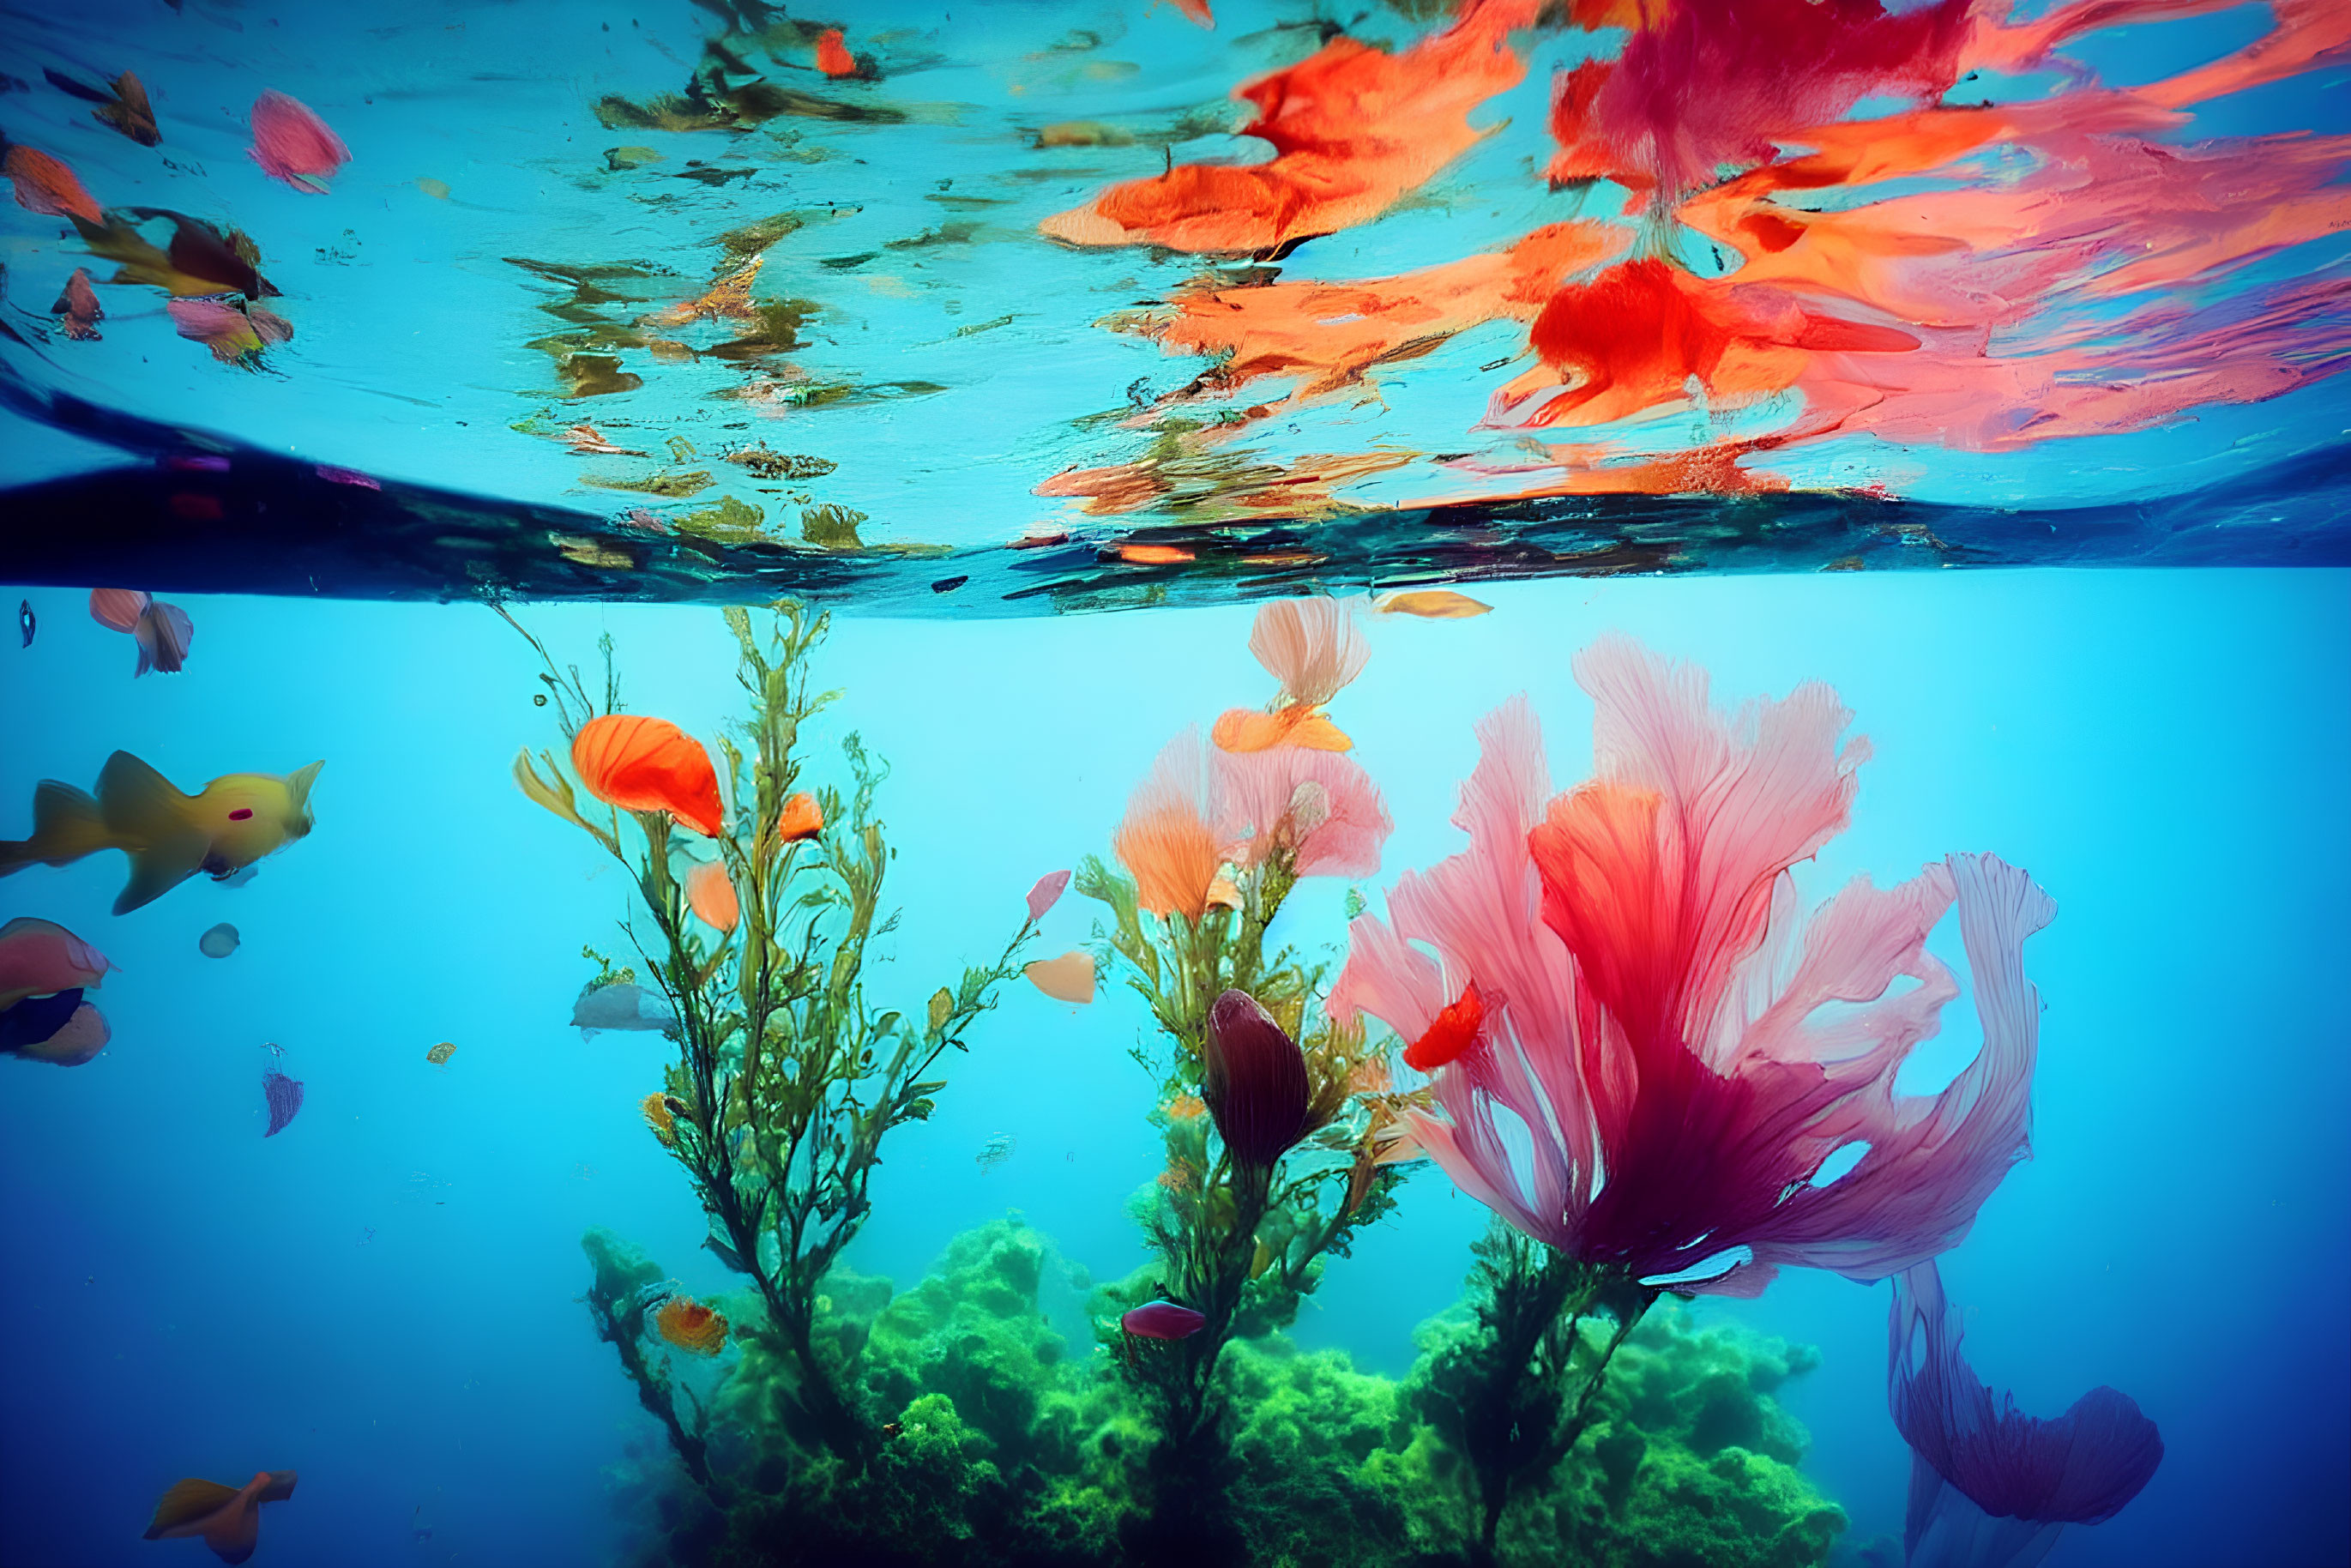 Vibrant orange flowers and plants in clear blue underwater view